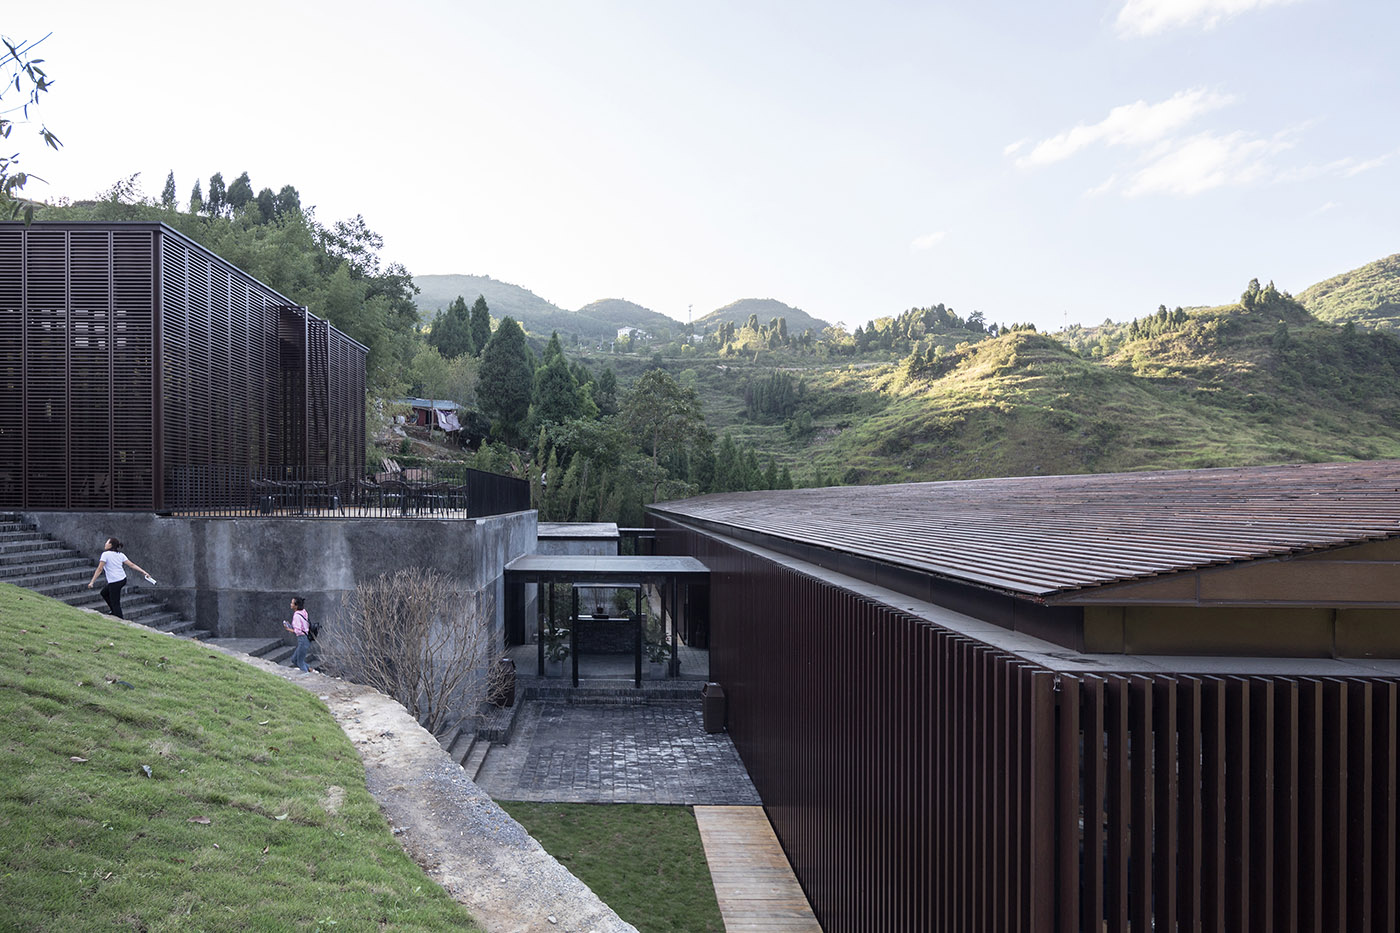 Mountain Restaurant & Bar: volumes, spaces and settings following the slope of a hill